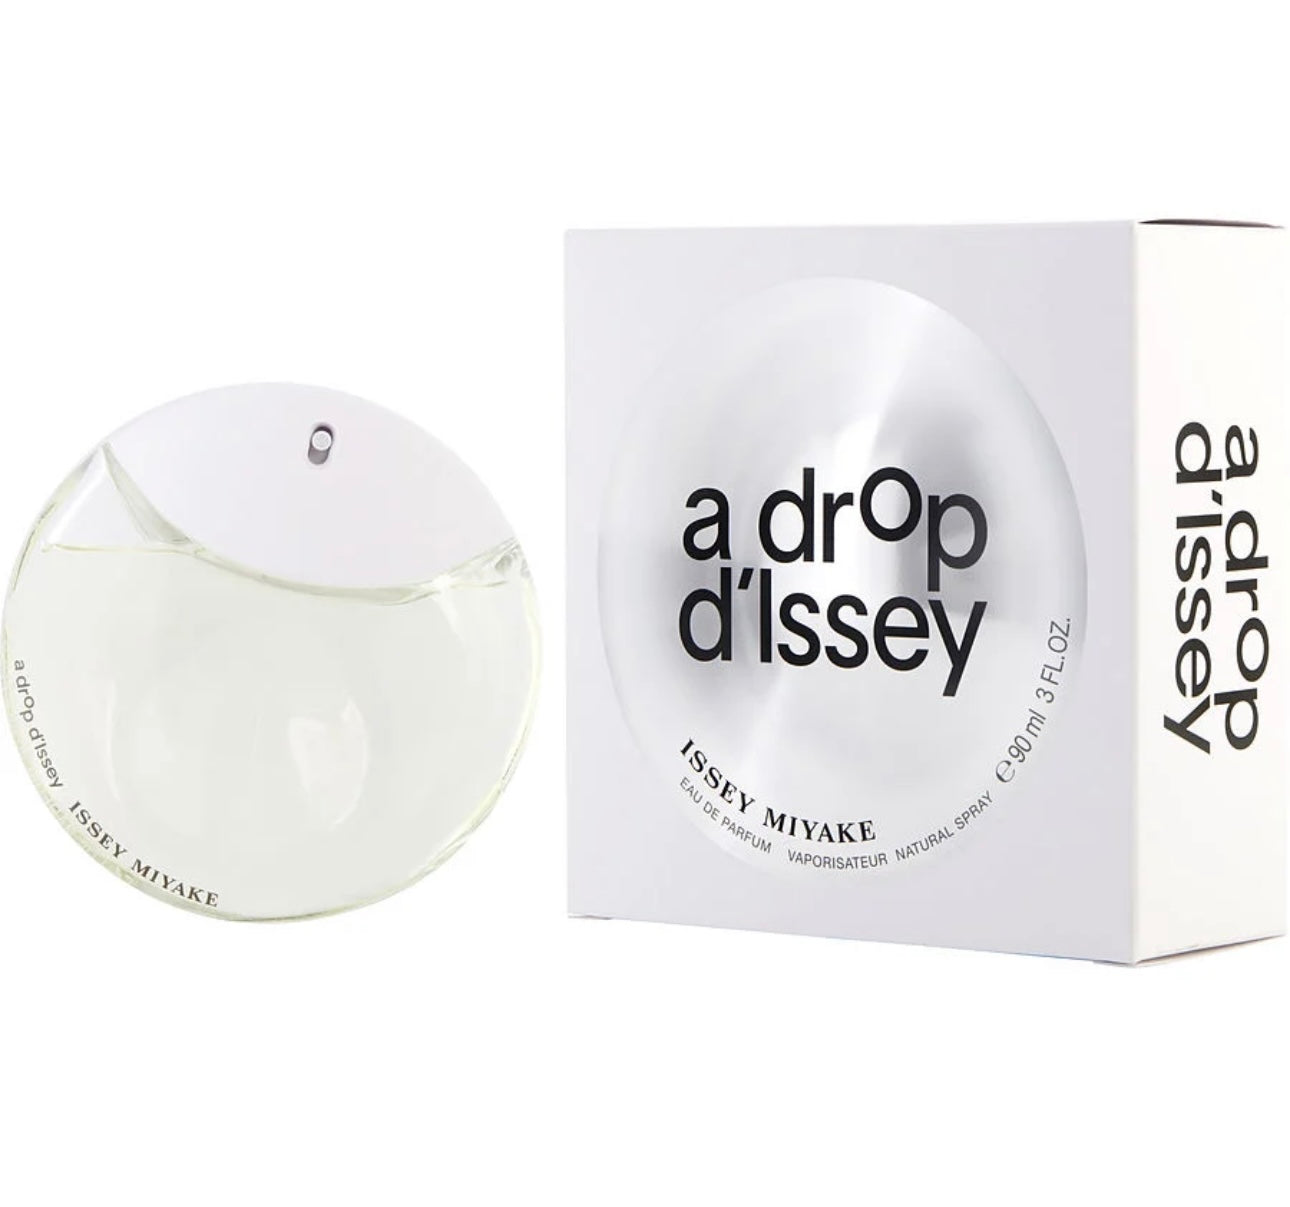 Issey Miyake-A Drop d'Issey-EdP